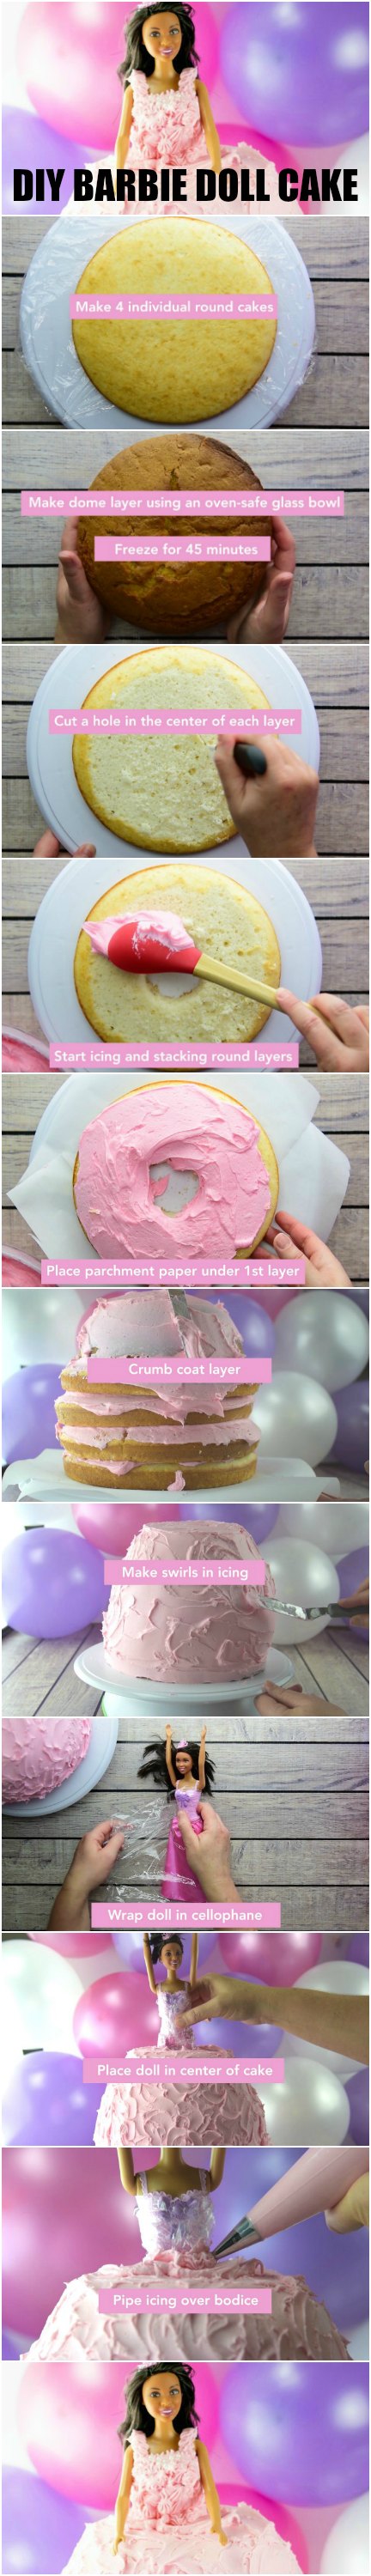 DIY Barbie Doll Cake - step by step instructions | Mommy Evolution